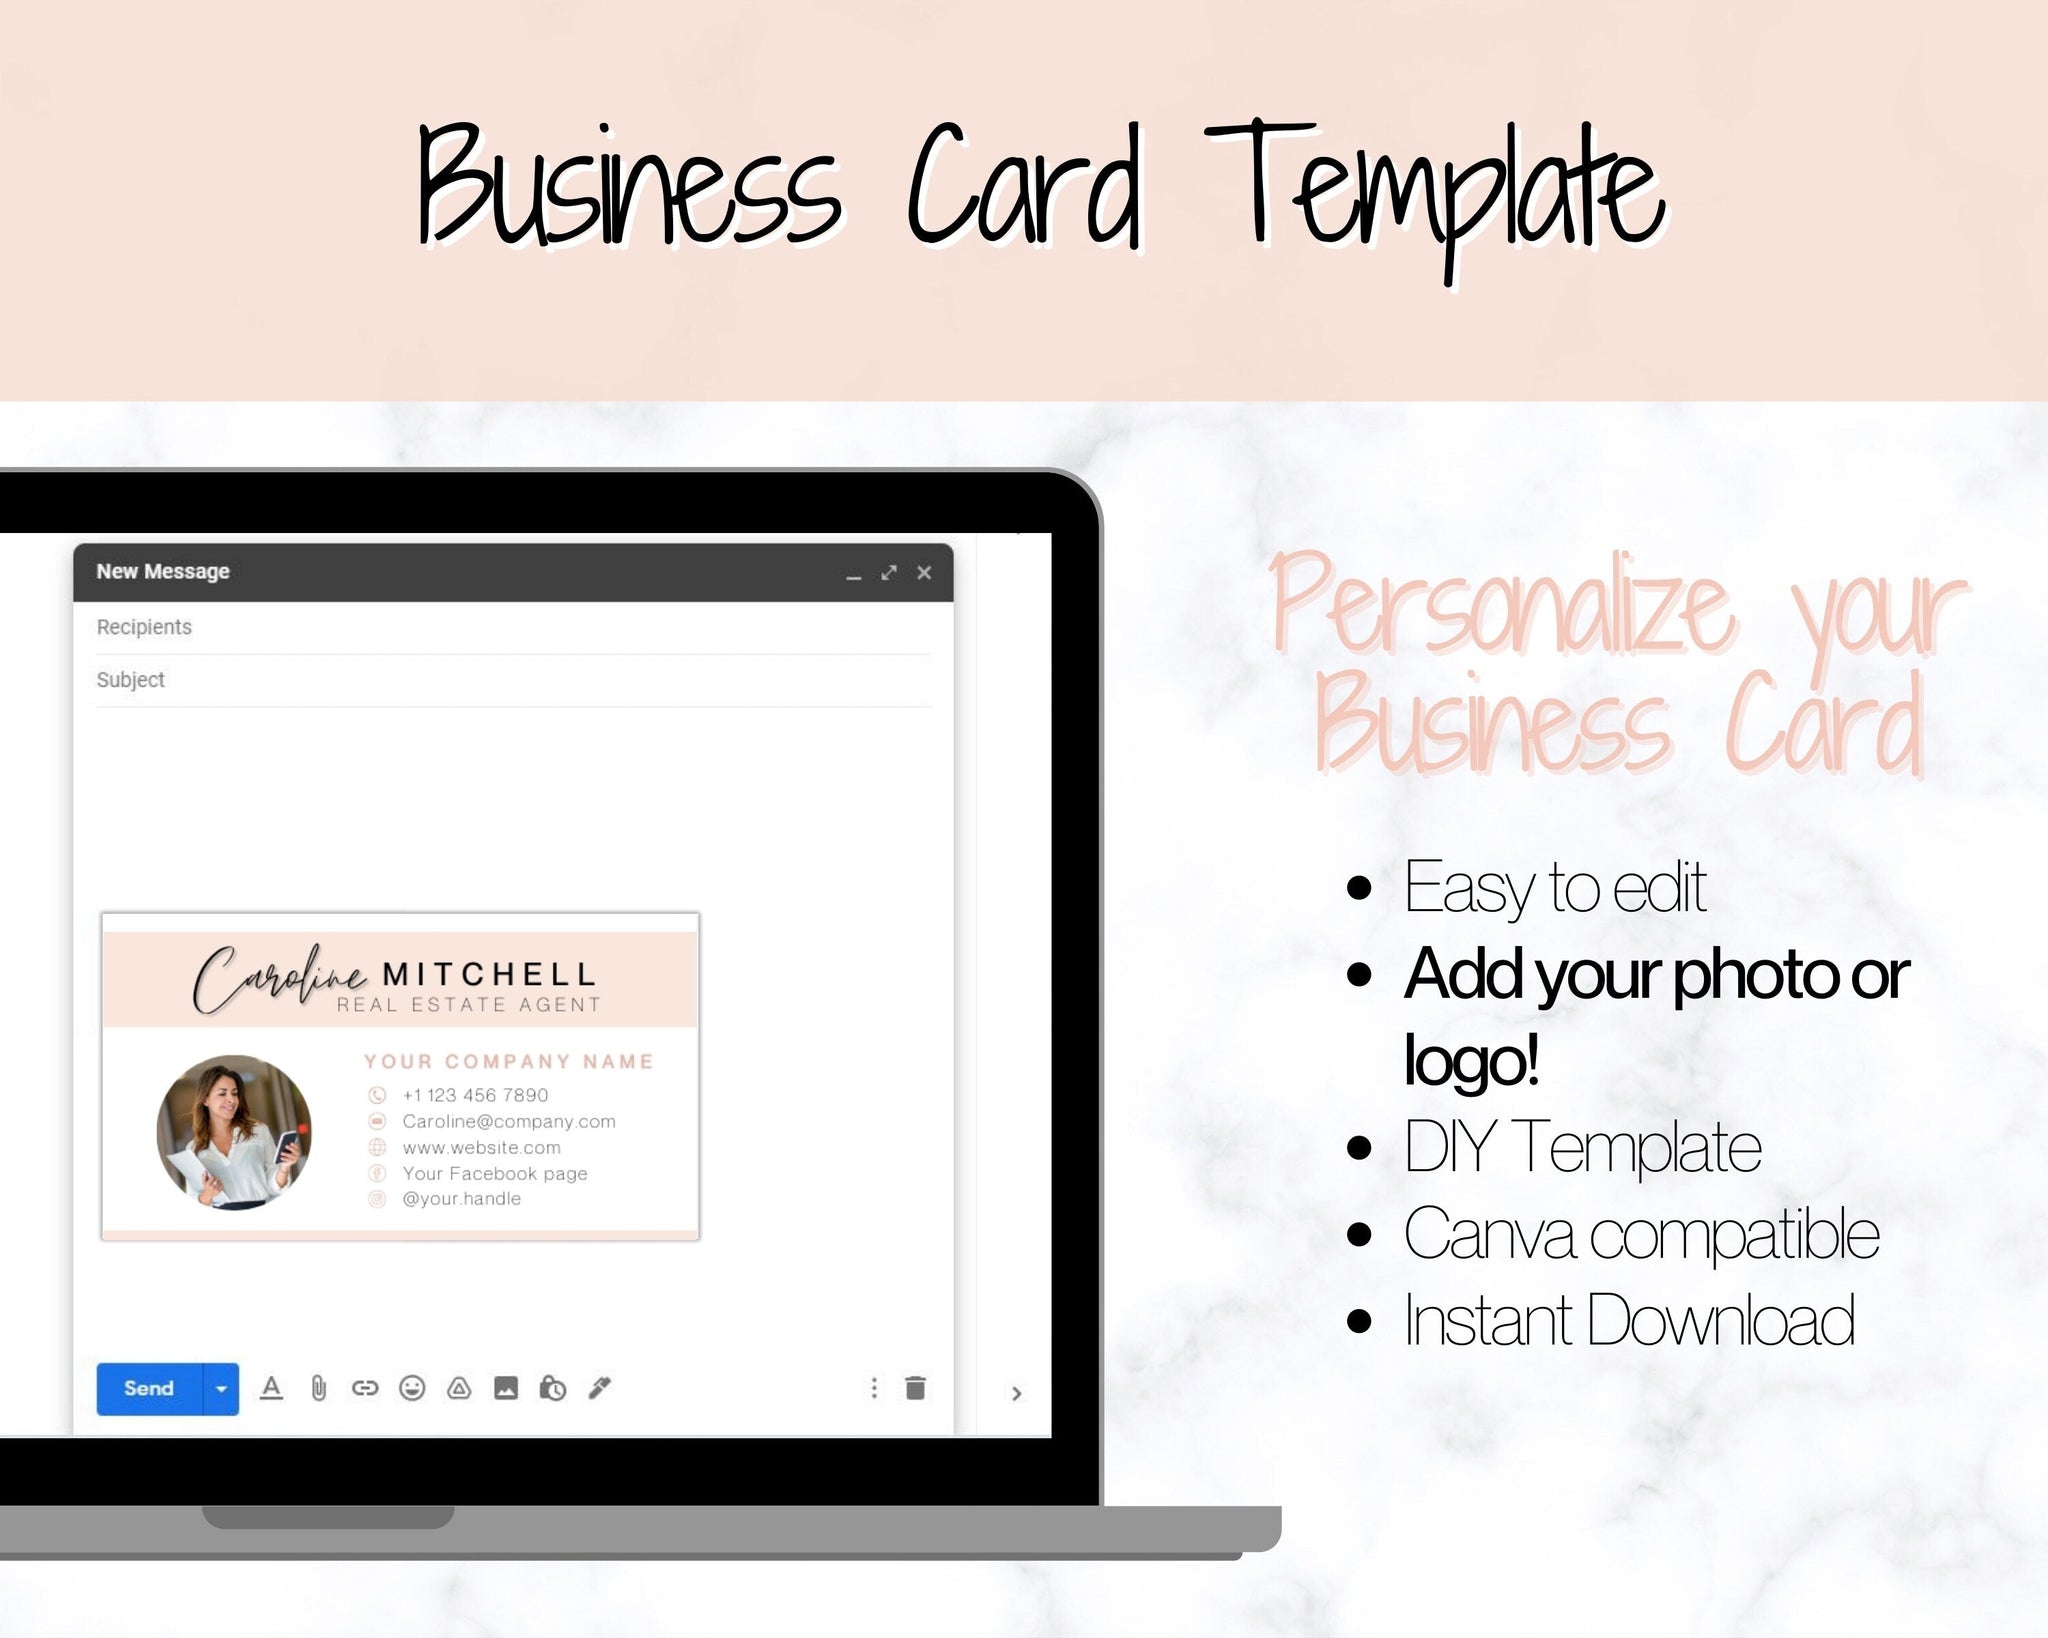 Minimalist business card - DIY Template - Instant Business Card